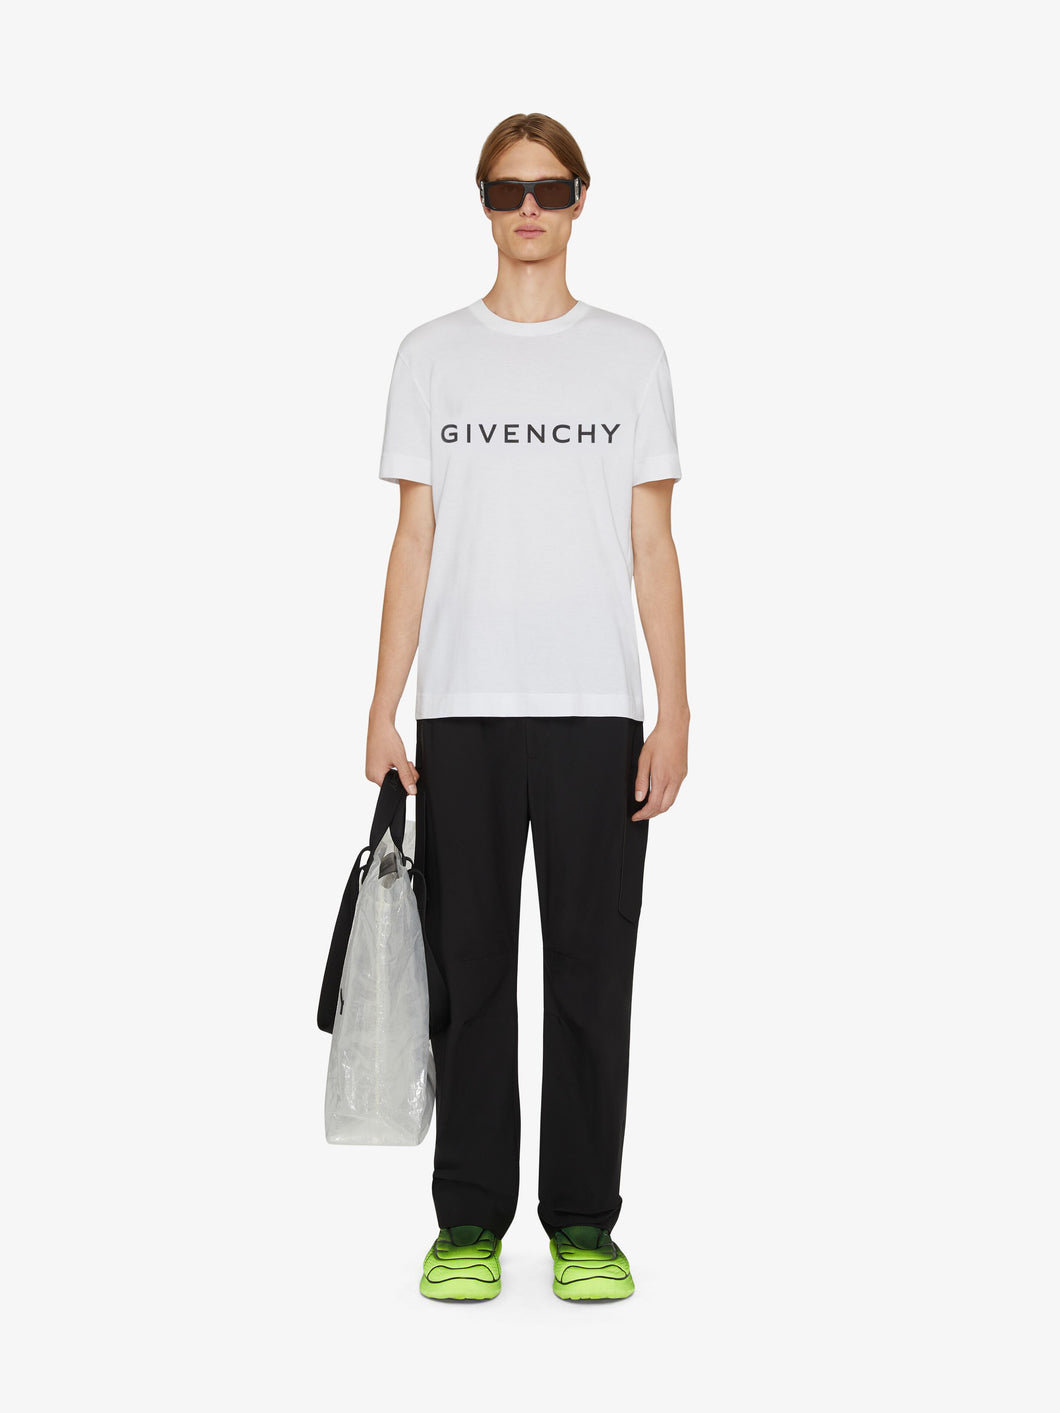 GIVENCHY T-shirt slim New Collection FW23/24